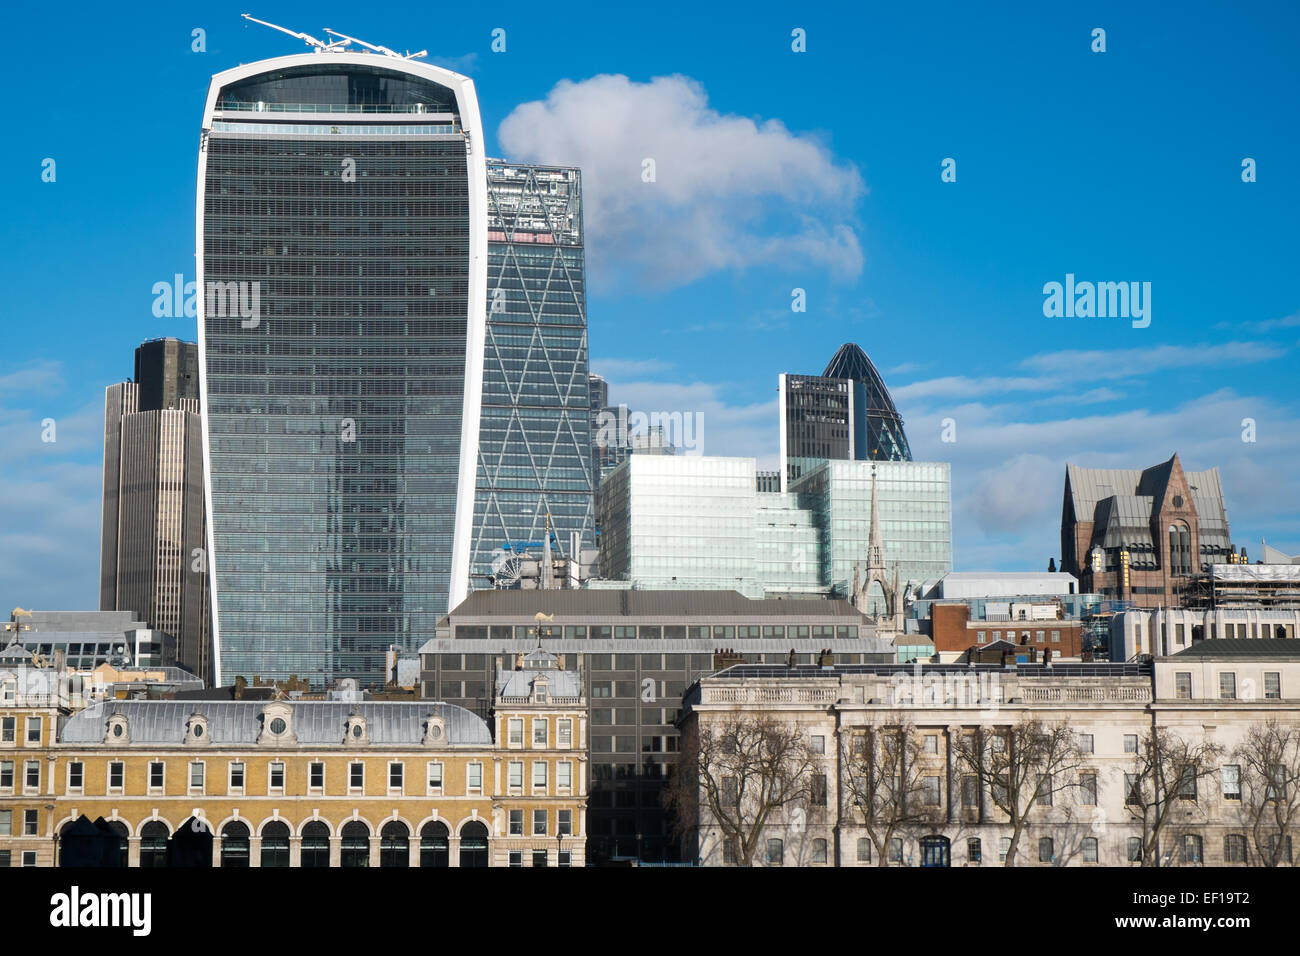 city of london, gherkin,walkie talkie building,cheesegrater,old billingsgate fish market , customs house - natwest tower Stock Photo